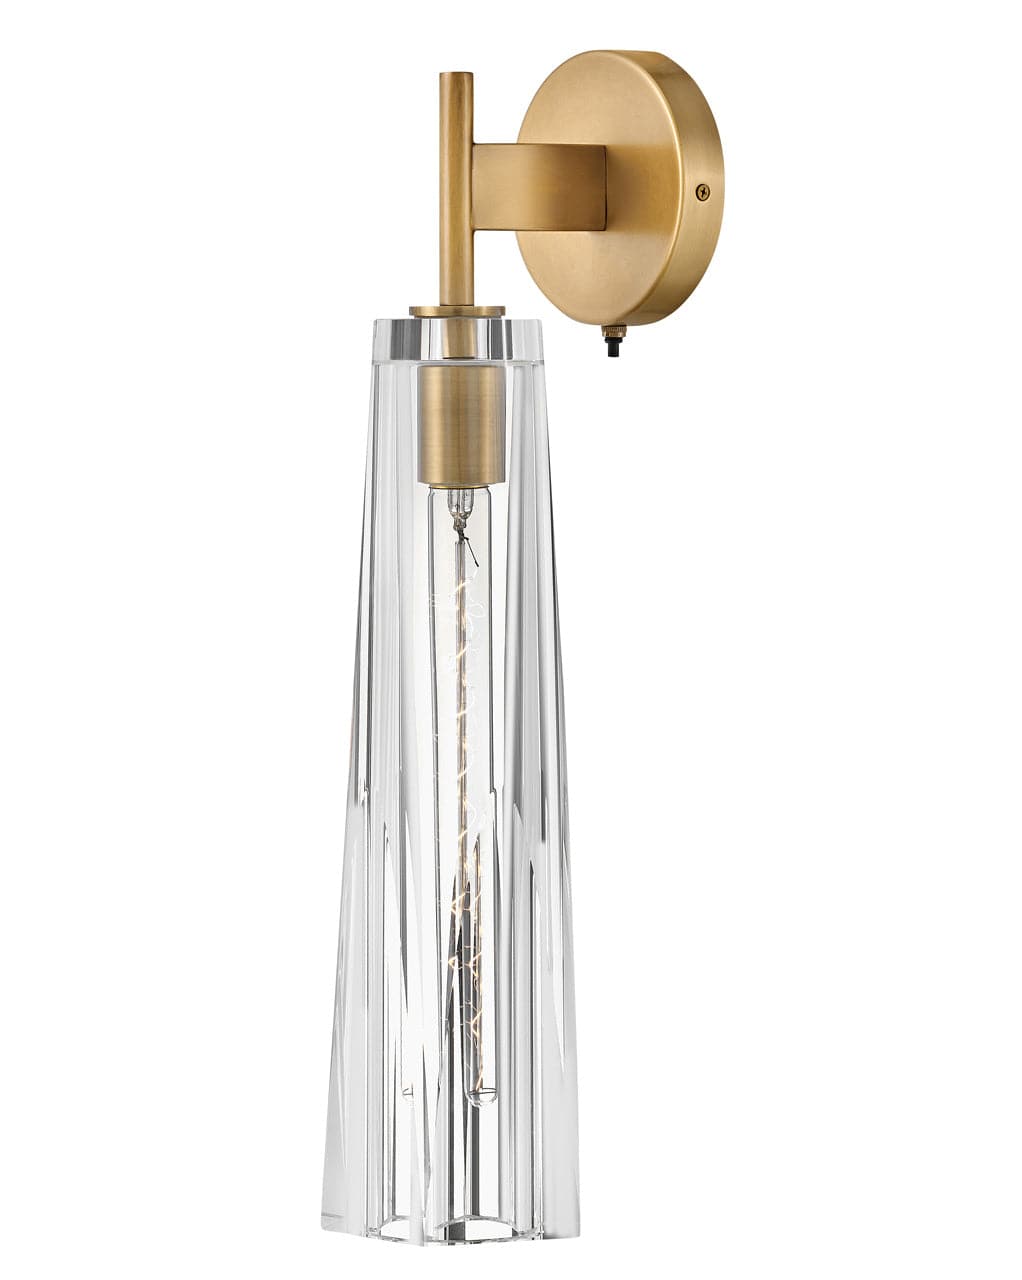 Fredrick Ramond - FR31100HBR-CL - One Light Wall Sconce - Cosette - Heritage Brass with Clear glass